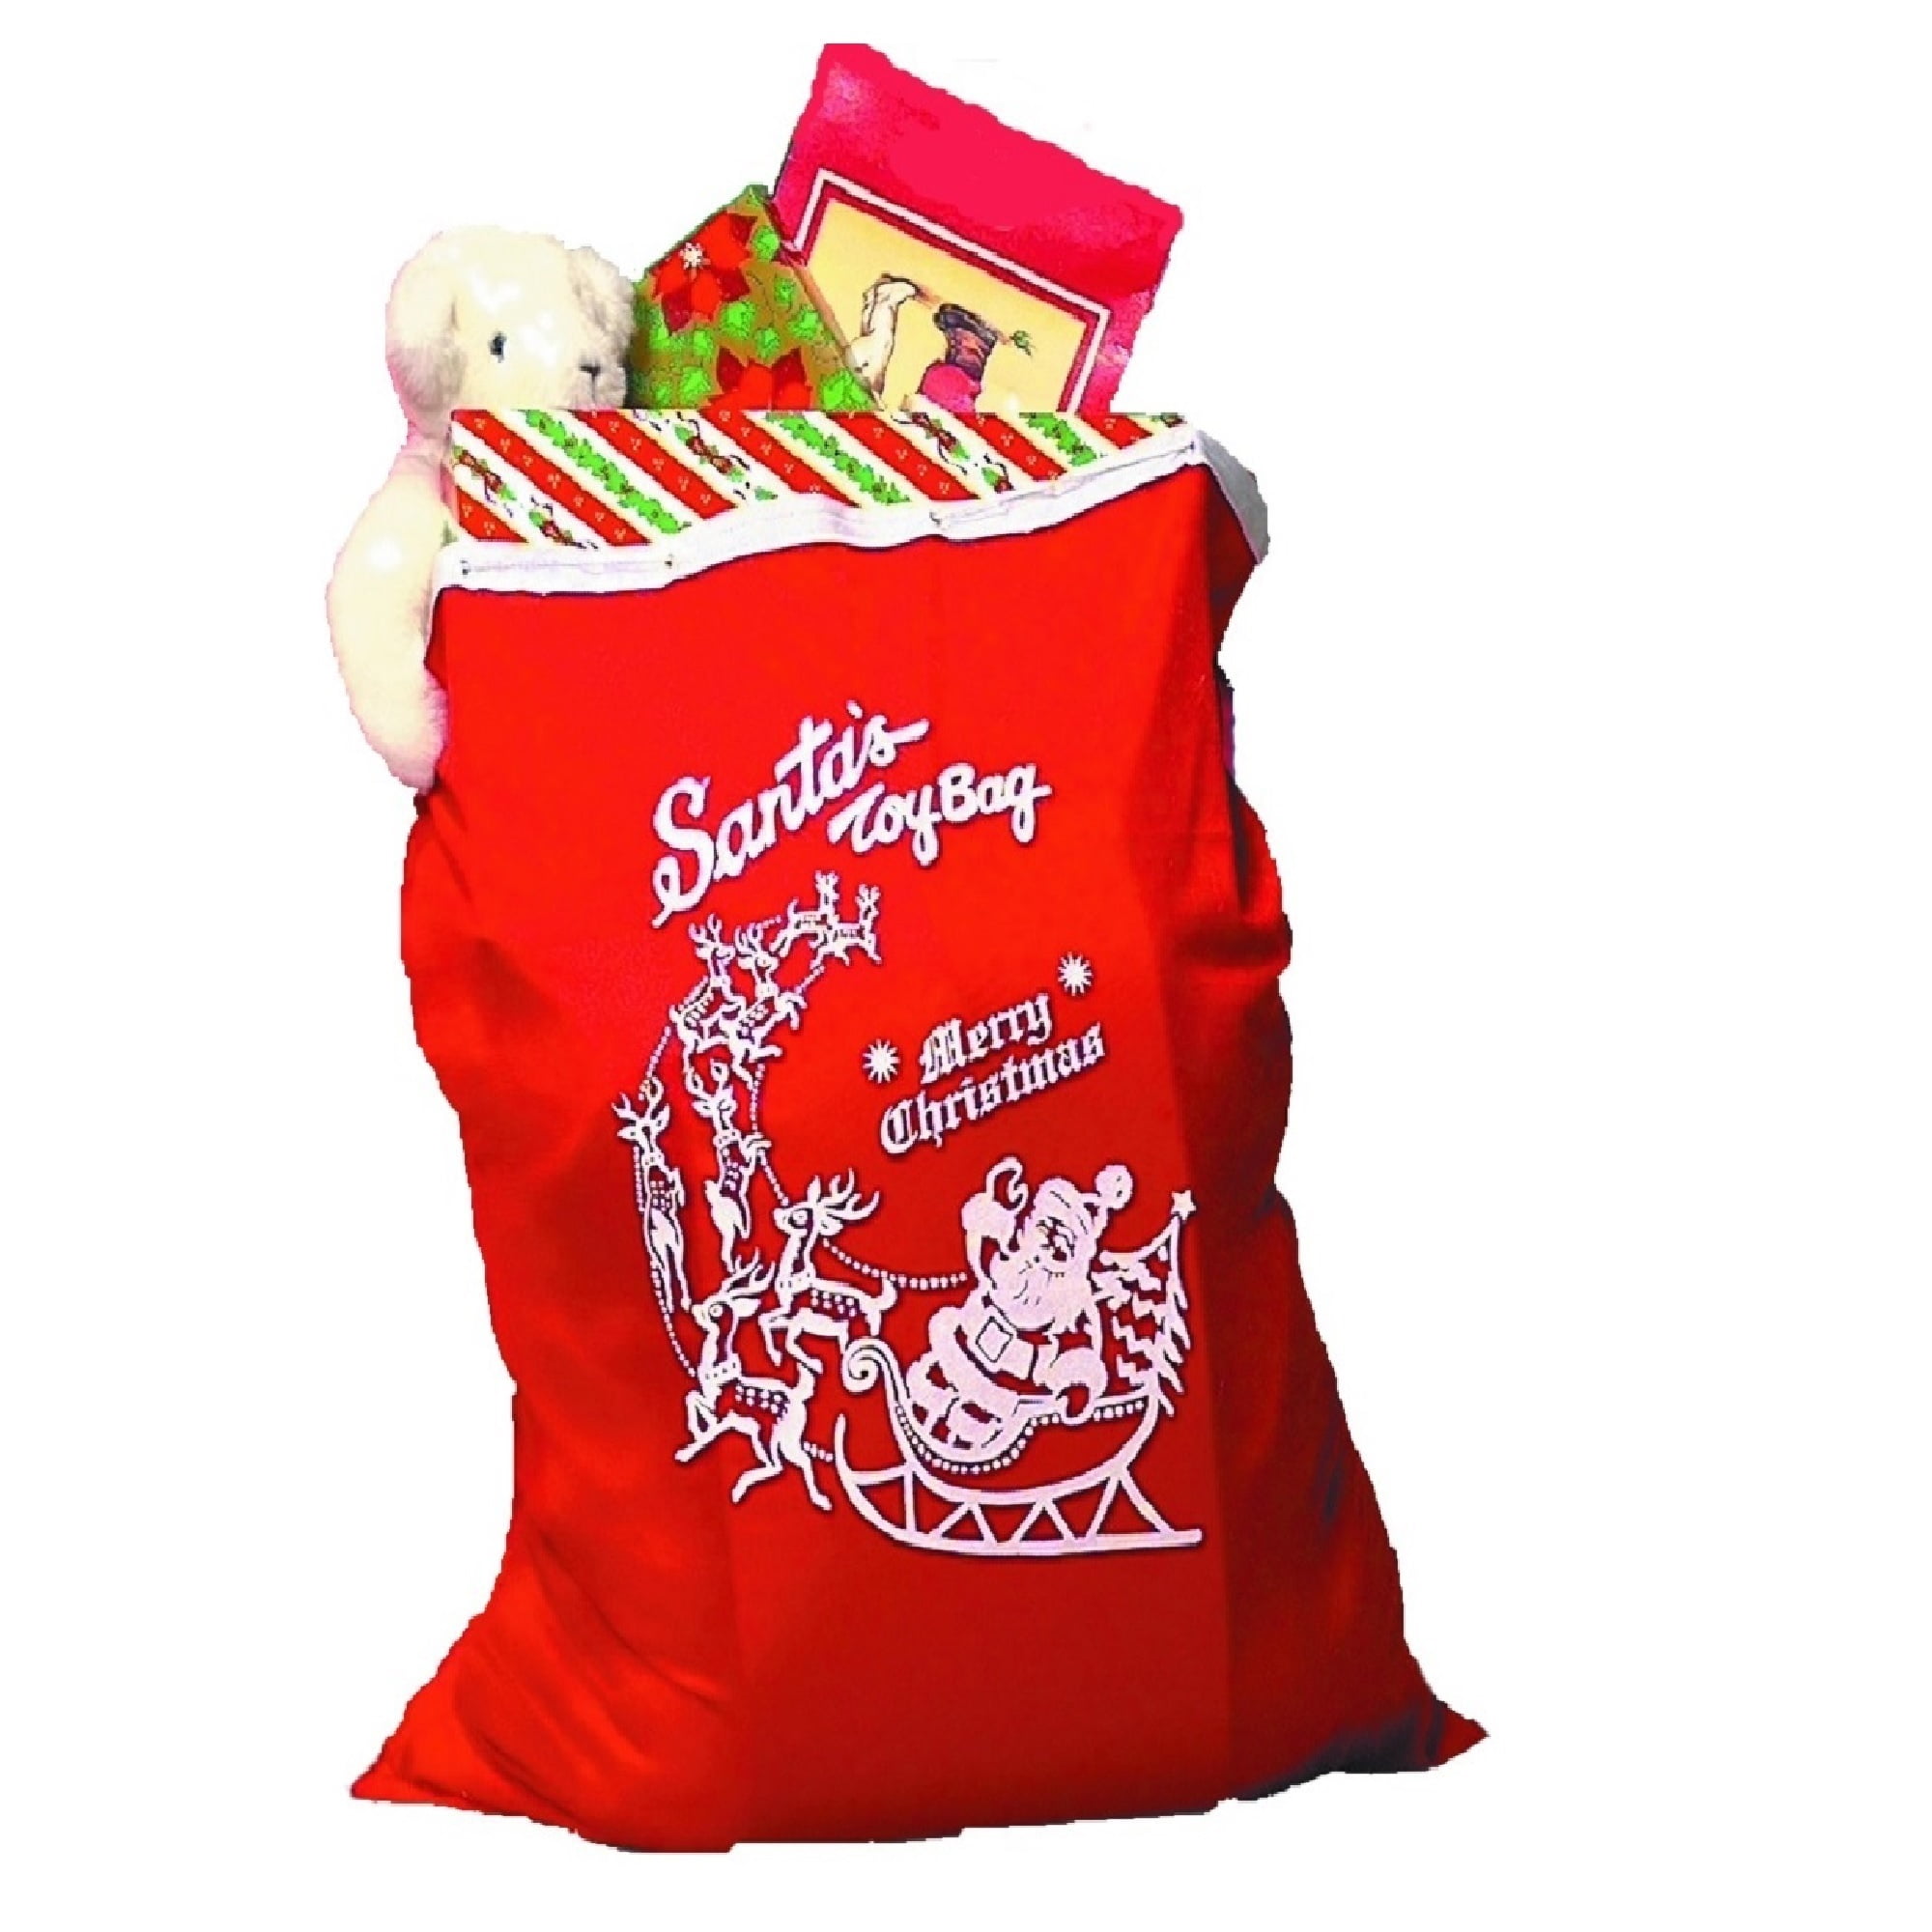 The Costume Center Red “Merry Christmas” Santa Claus Toy Bag with ...